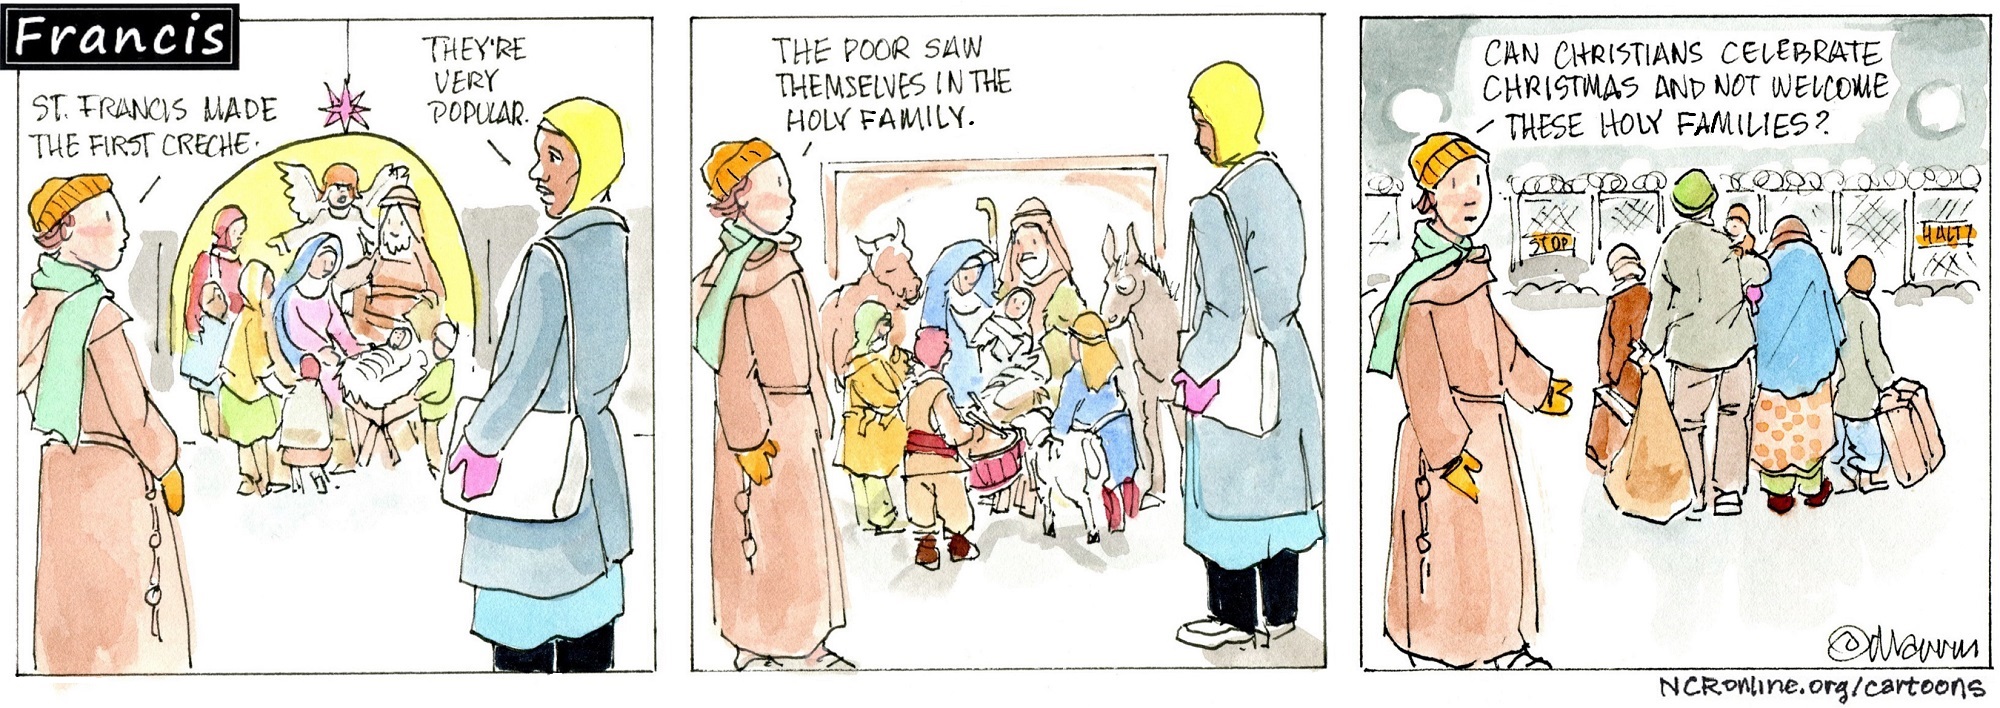 Francis, the comic strip: The Holy Family in the crèche reminds us of others who need welcome.